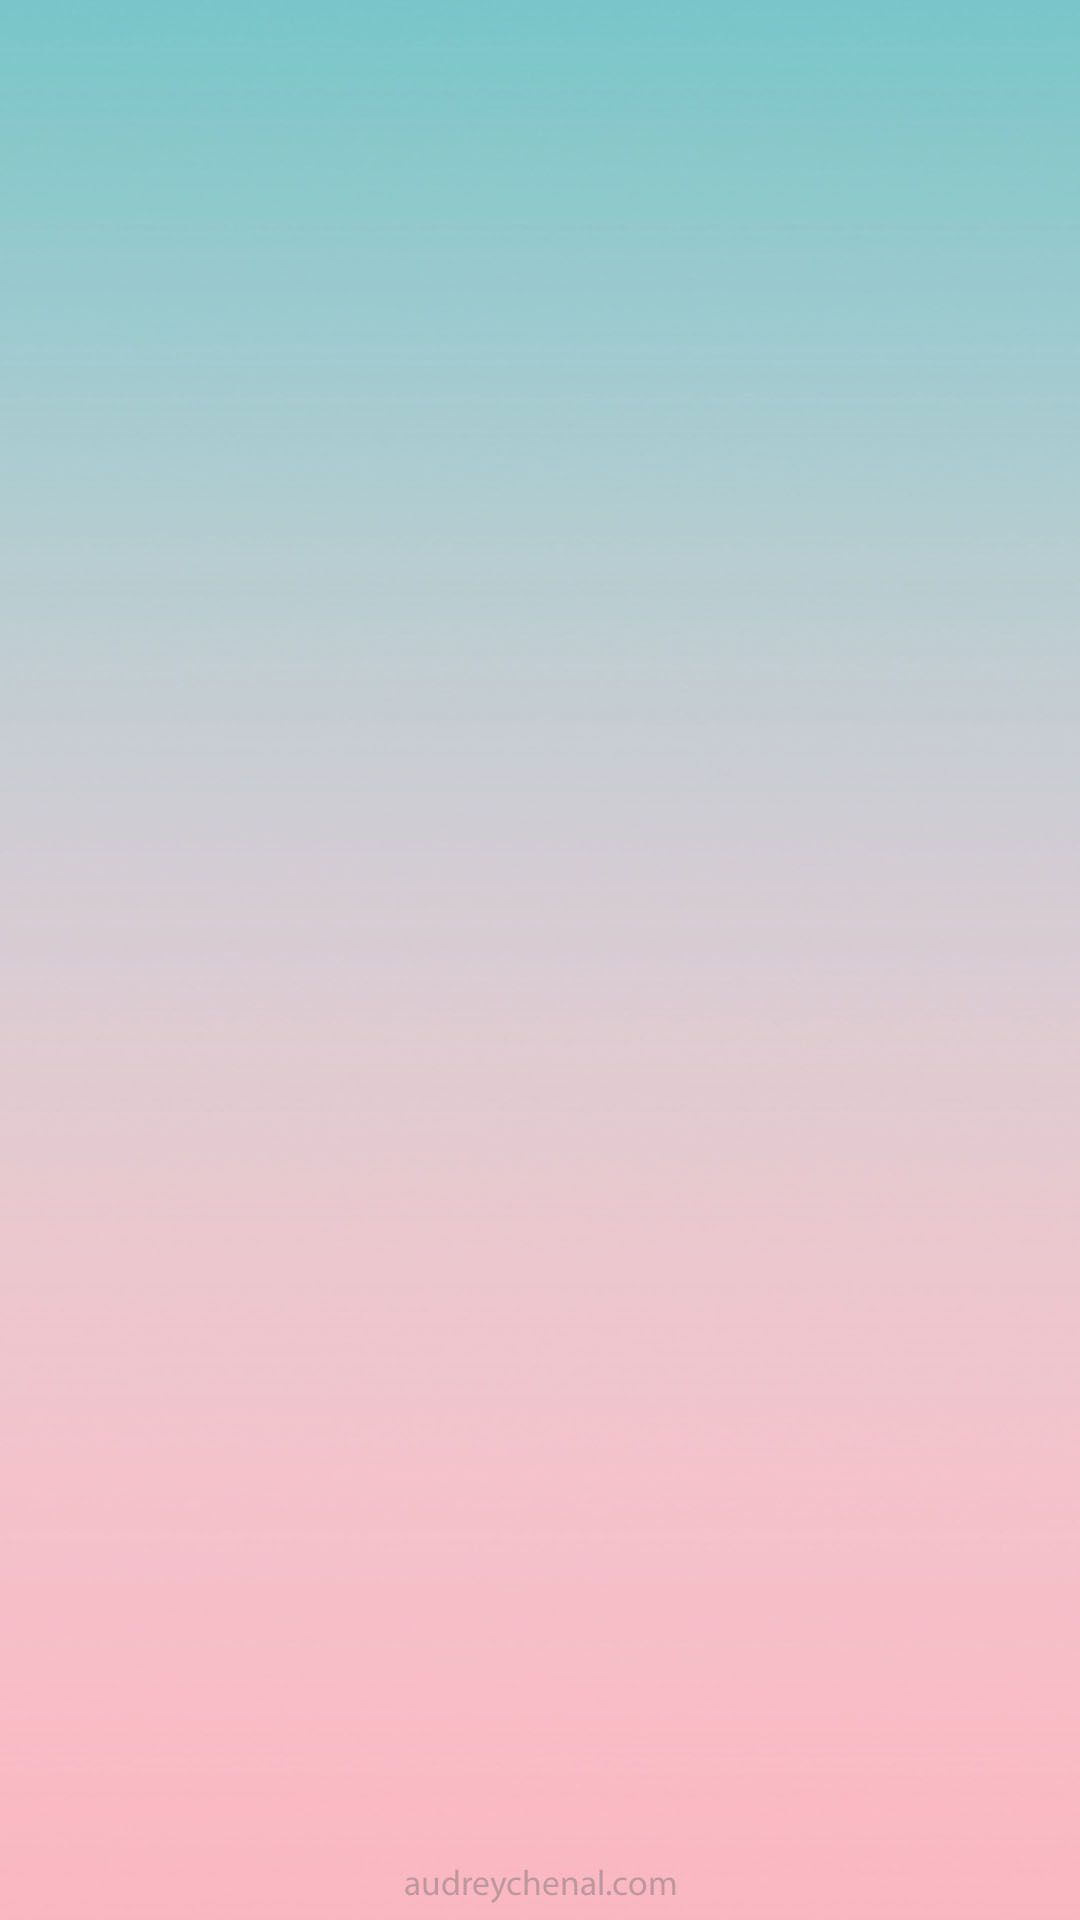 Pink And Teal Wallpapers